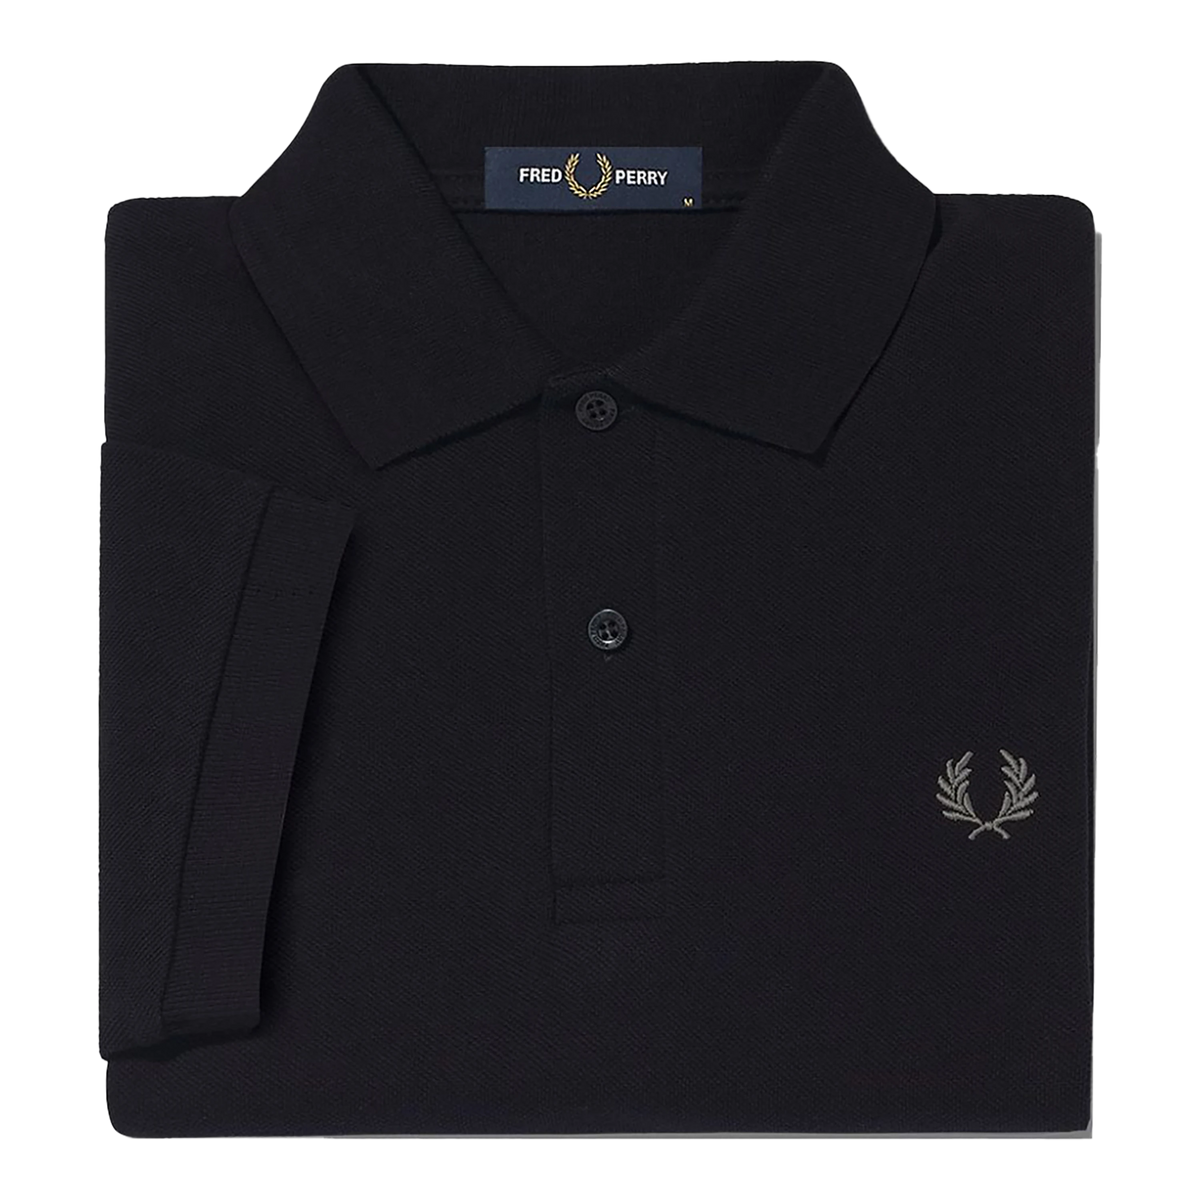 Fred Perry Plain Fred Perry Shirt For Men | Coes